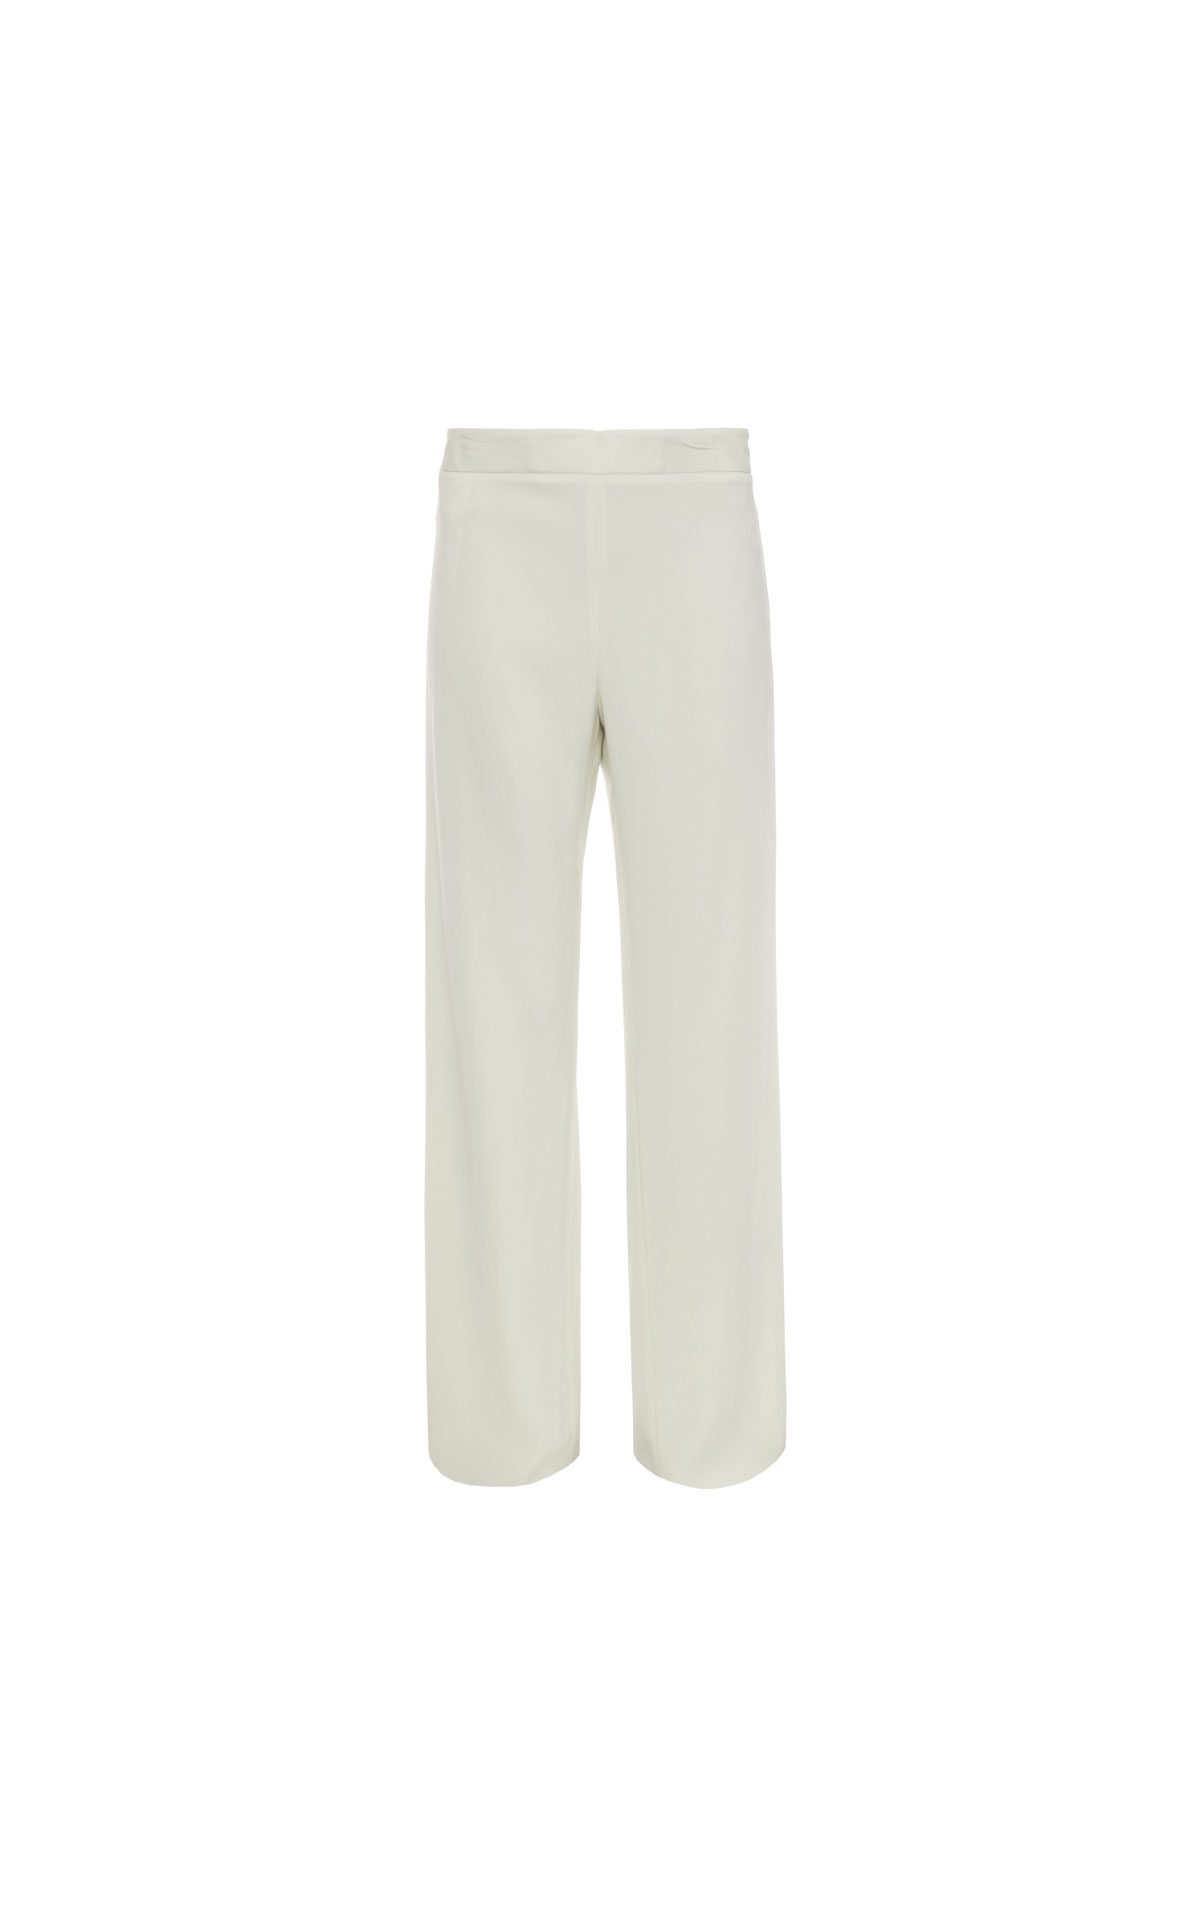 JIL SANDER Mint trousers from Bicester Village